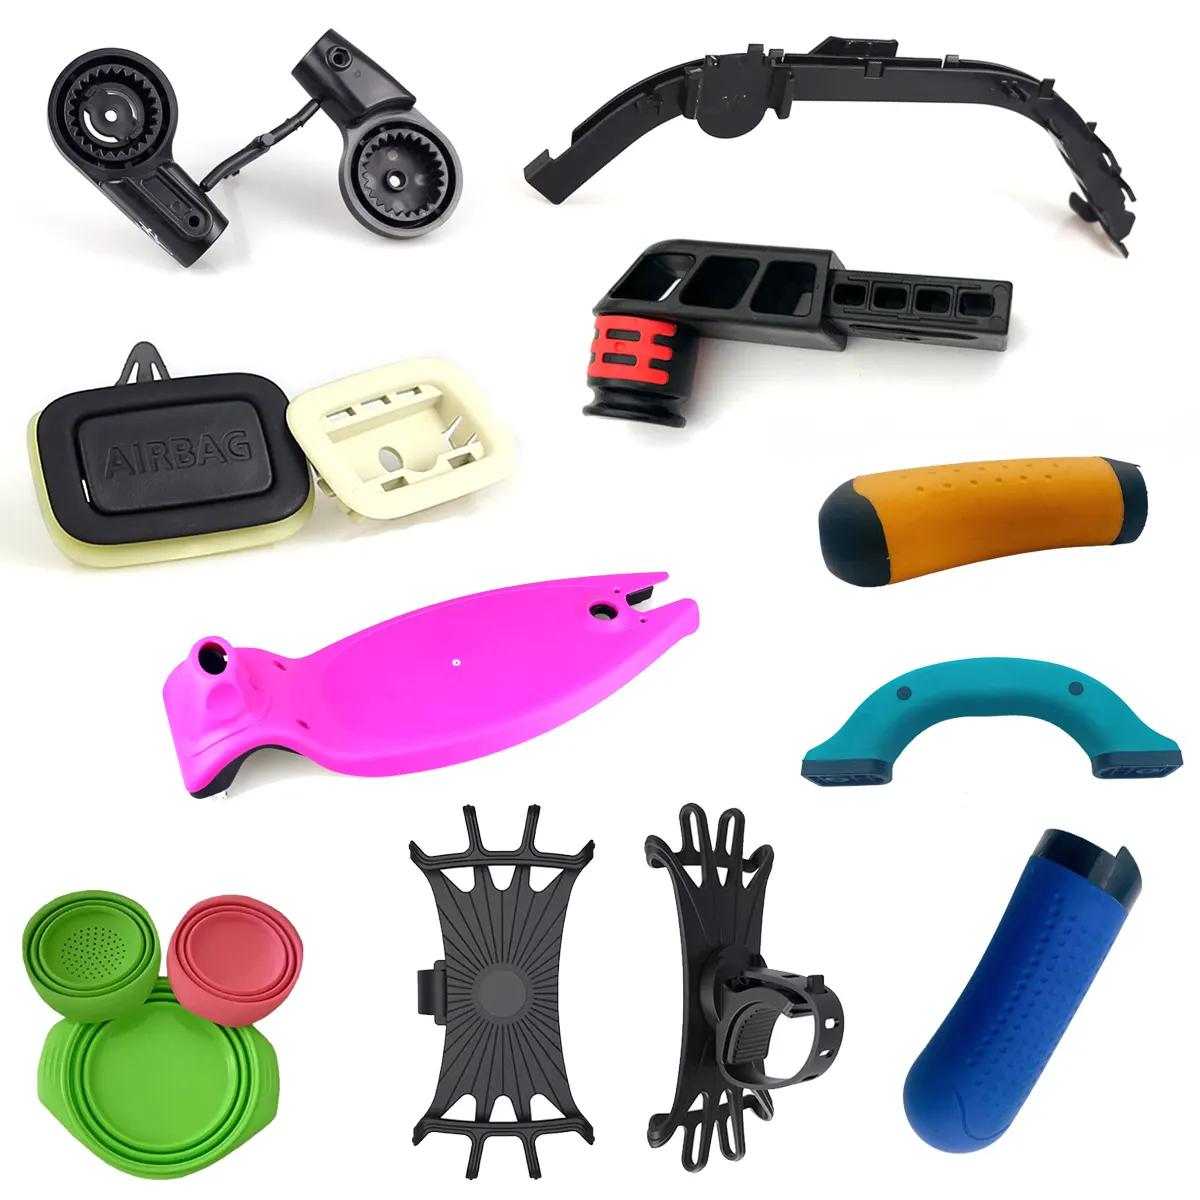 plastic molding service custom plastic parts rubber nylon moulding parts other rubber product injection products oem plastic